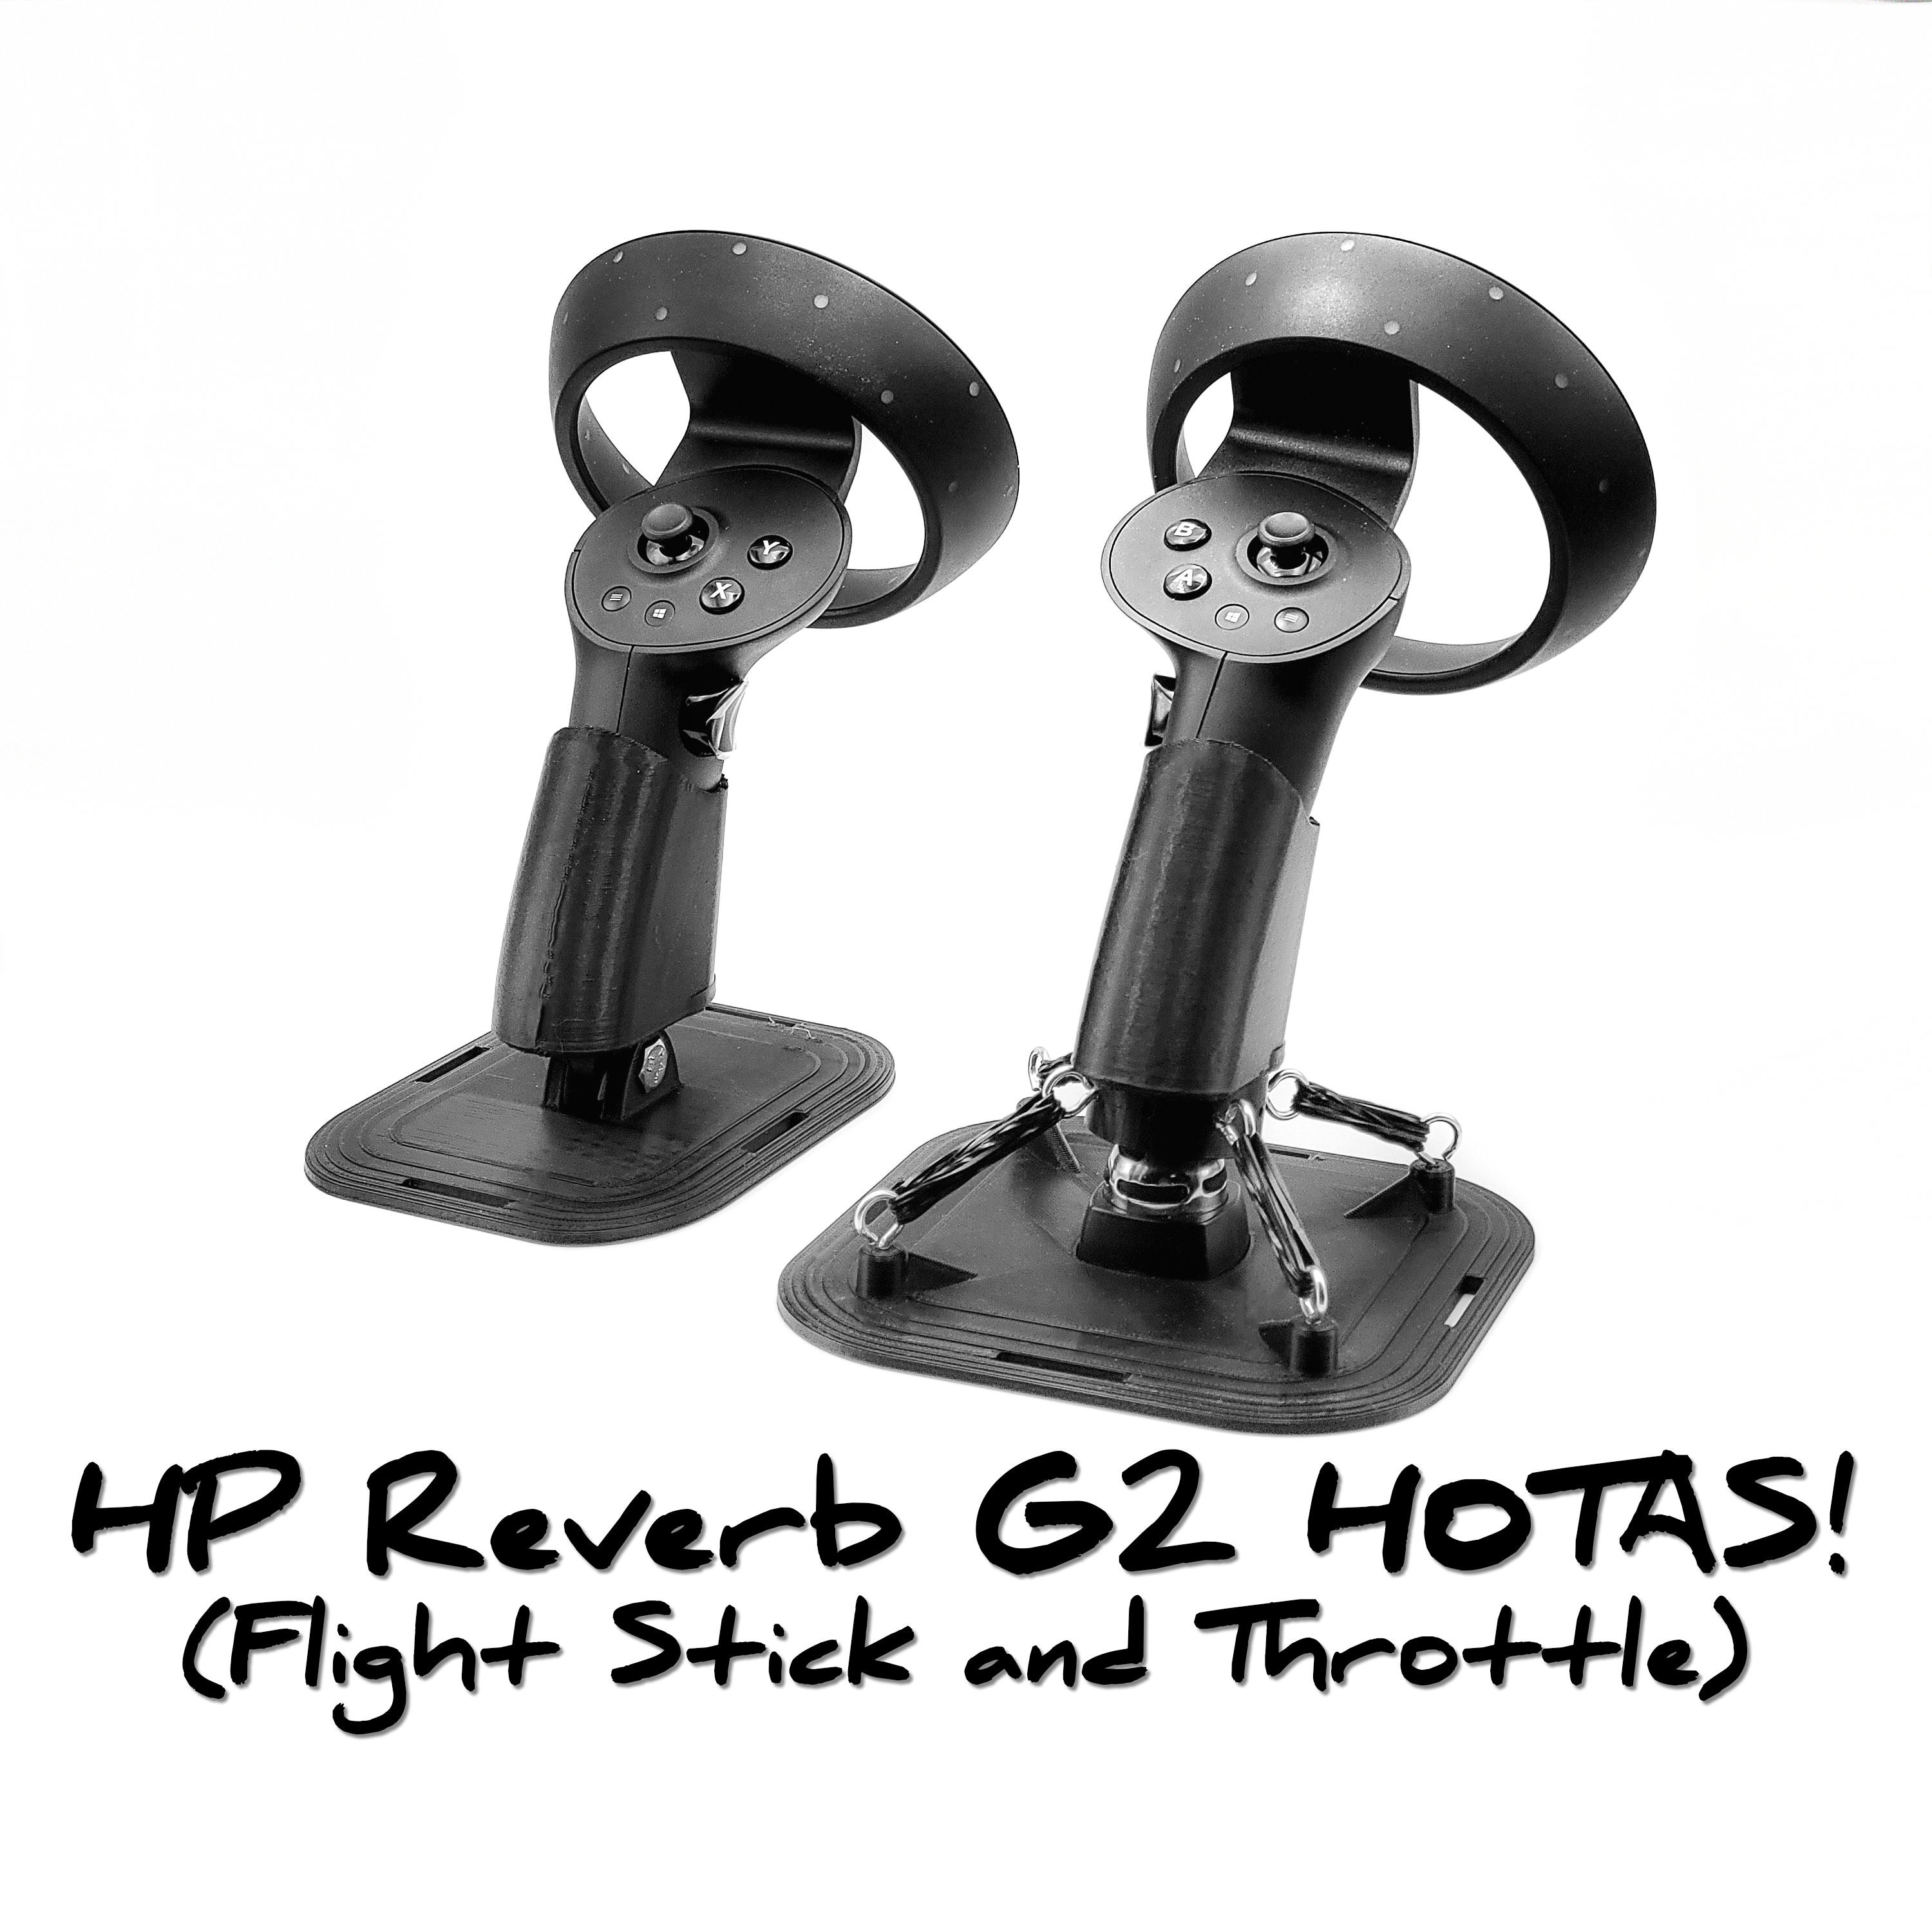 HP Reverb G2 Reviews, Pros and Cons